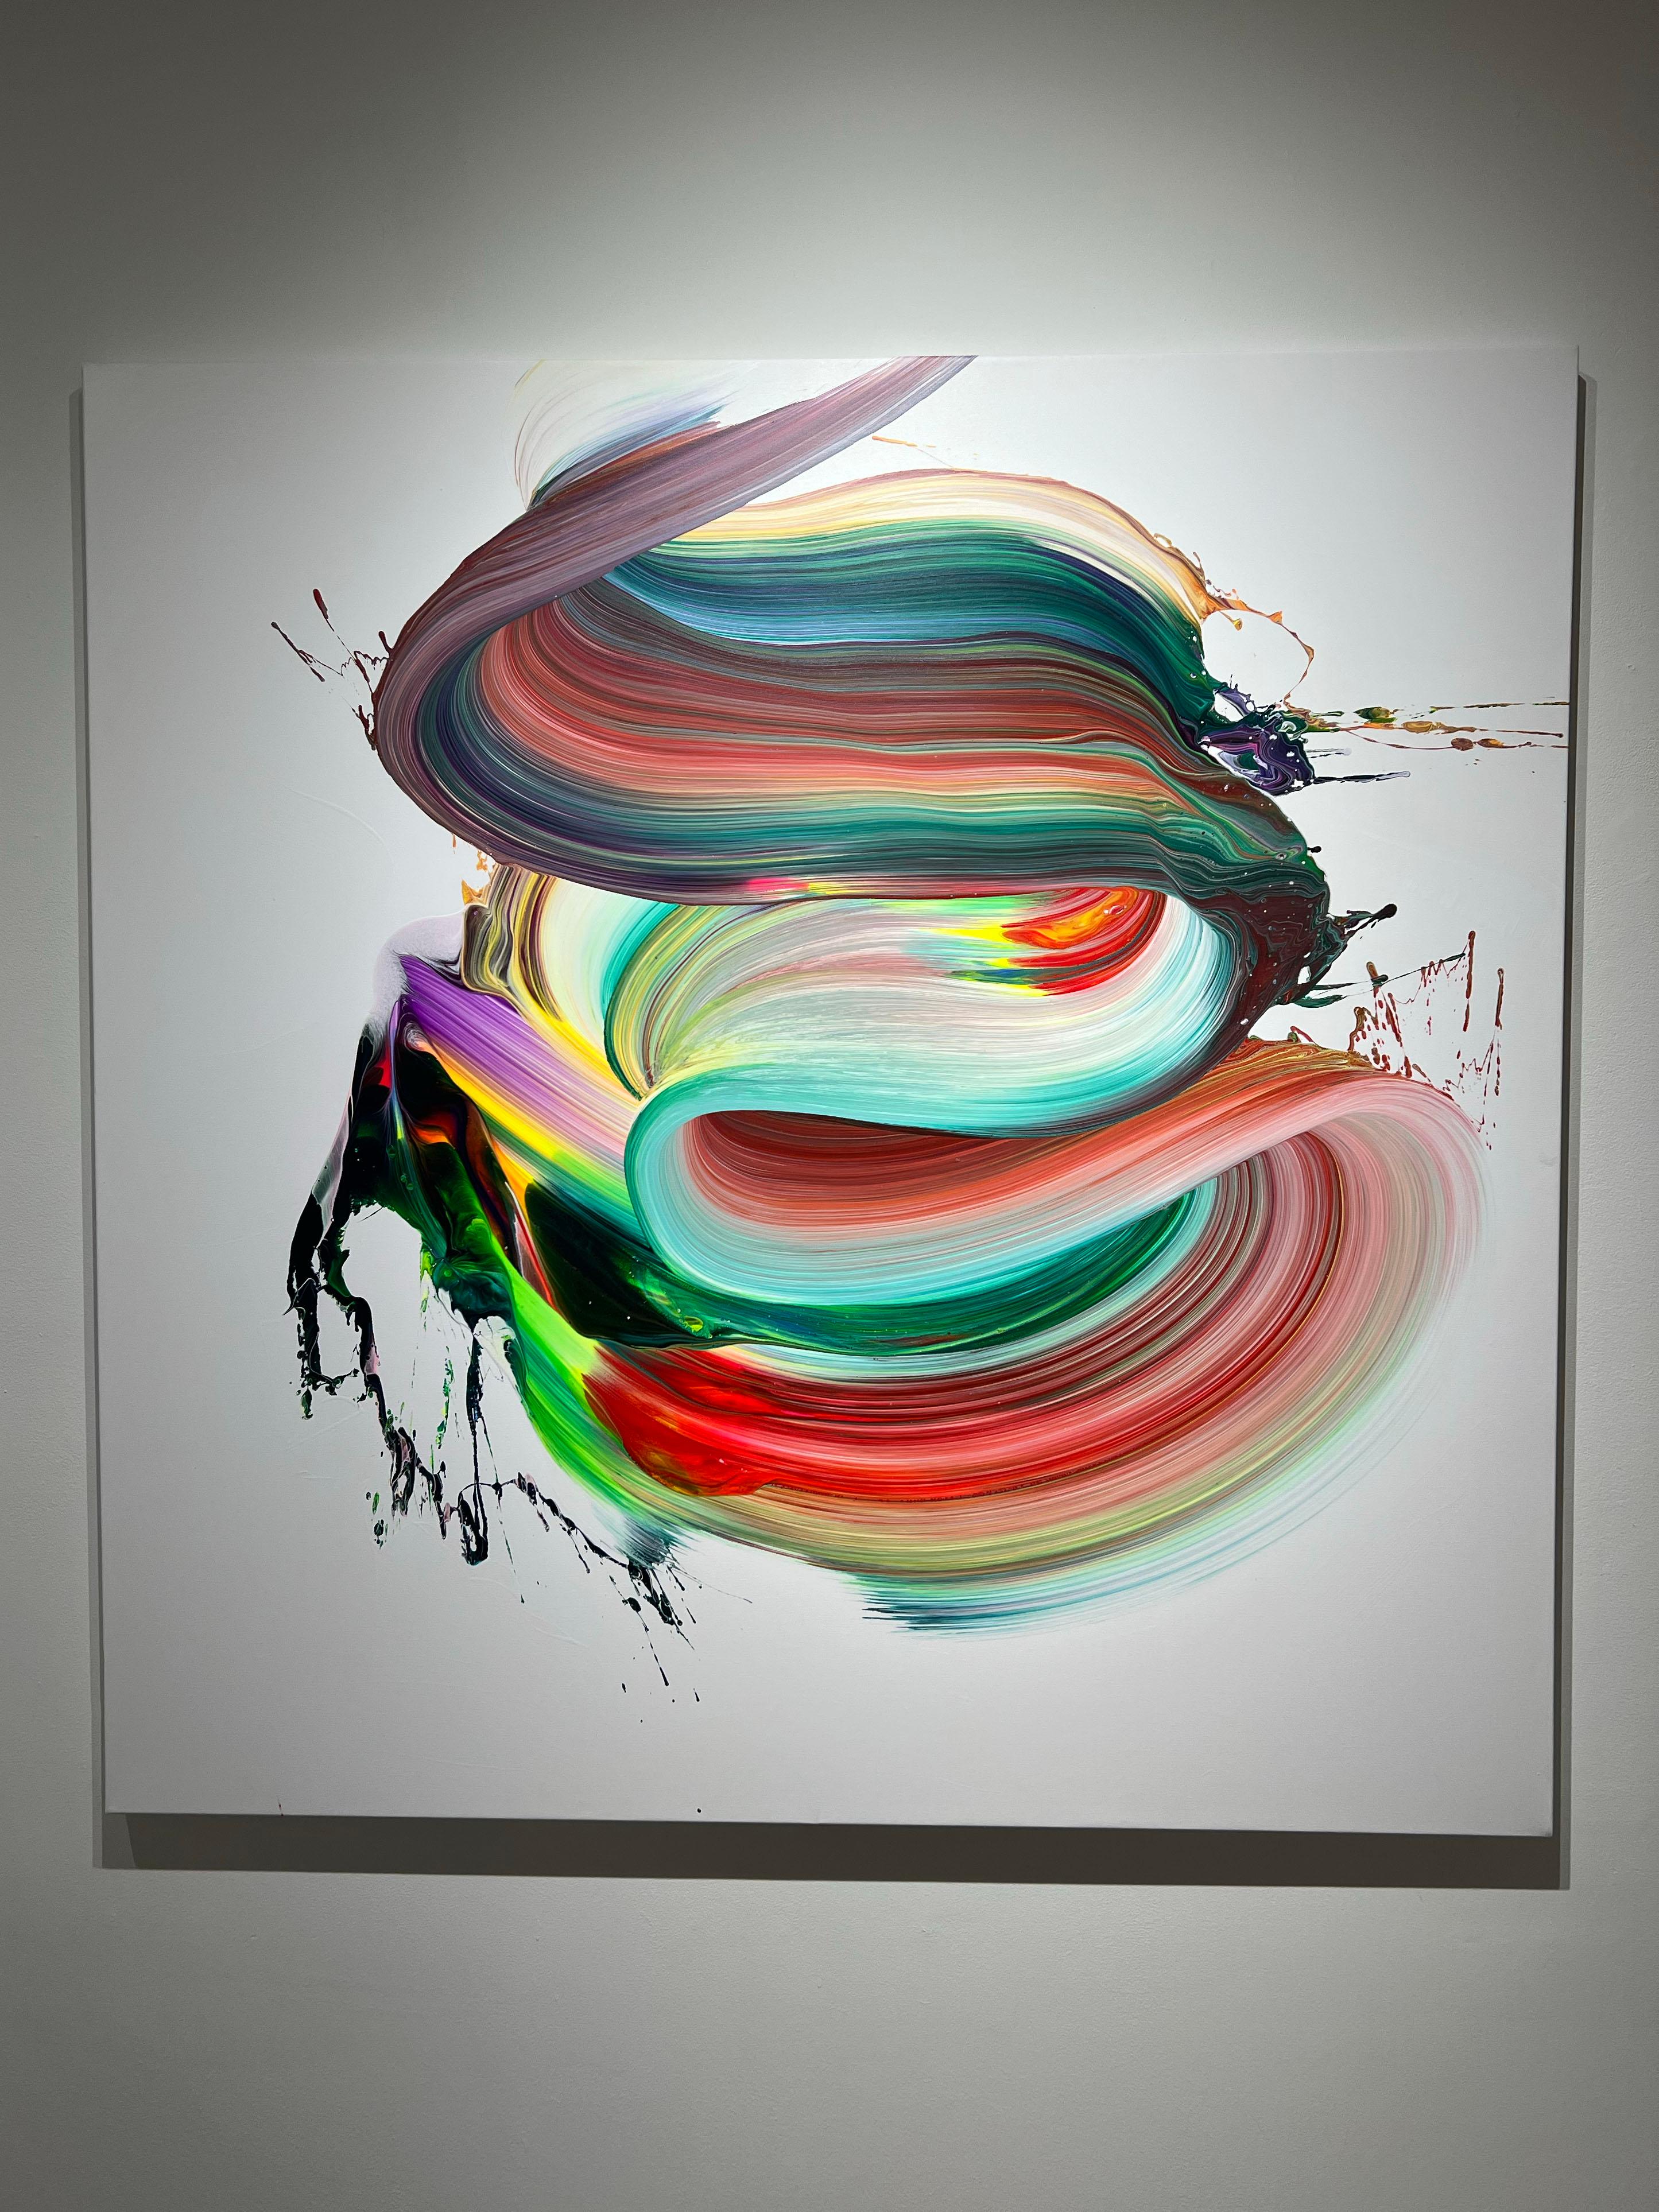 AV 863 -  A Liquid Abstraction in Red, Green, and Purple - Painting by Alex Voinea